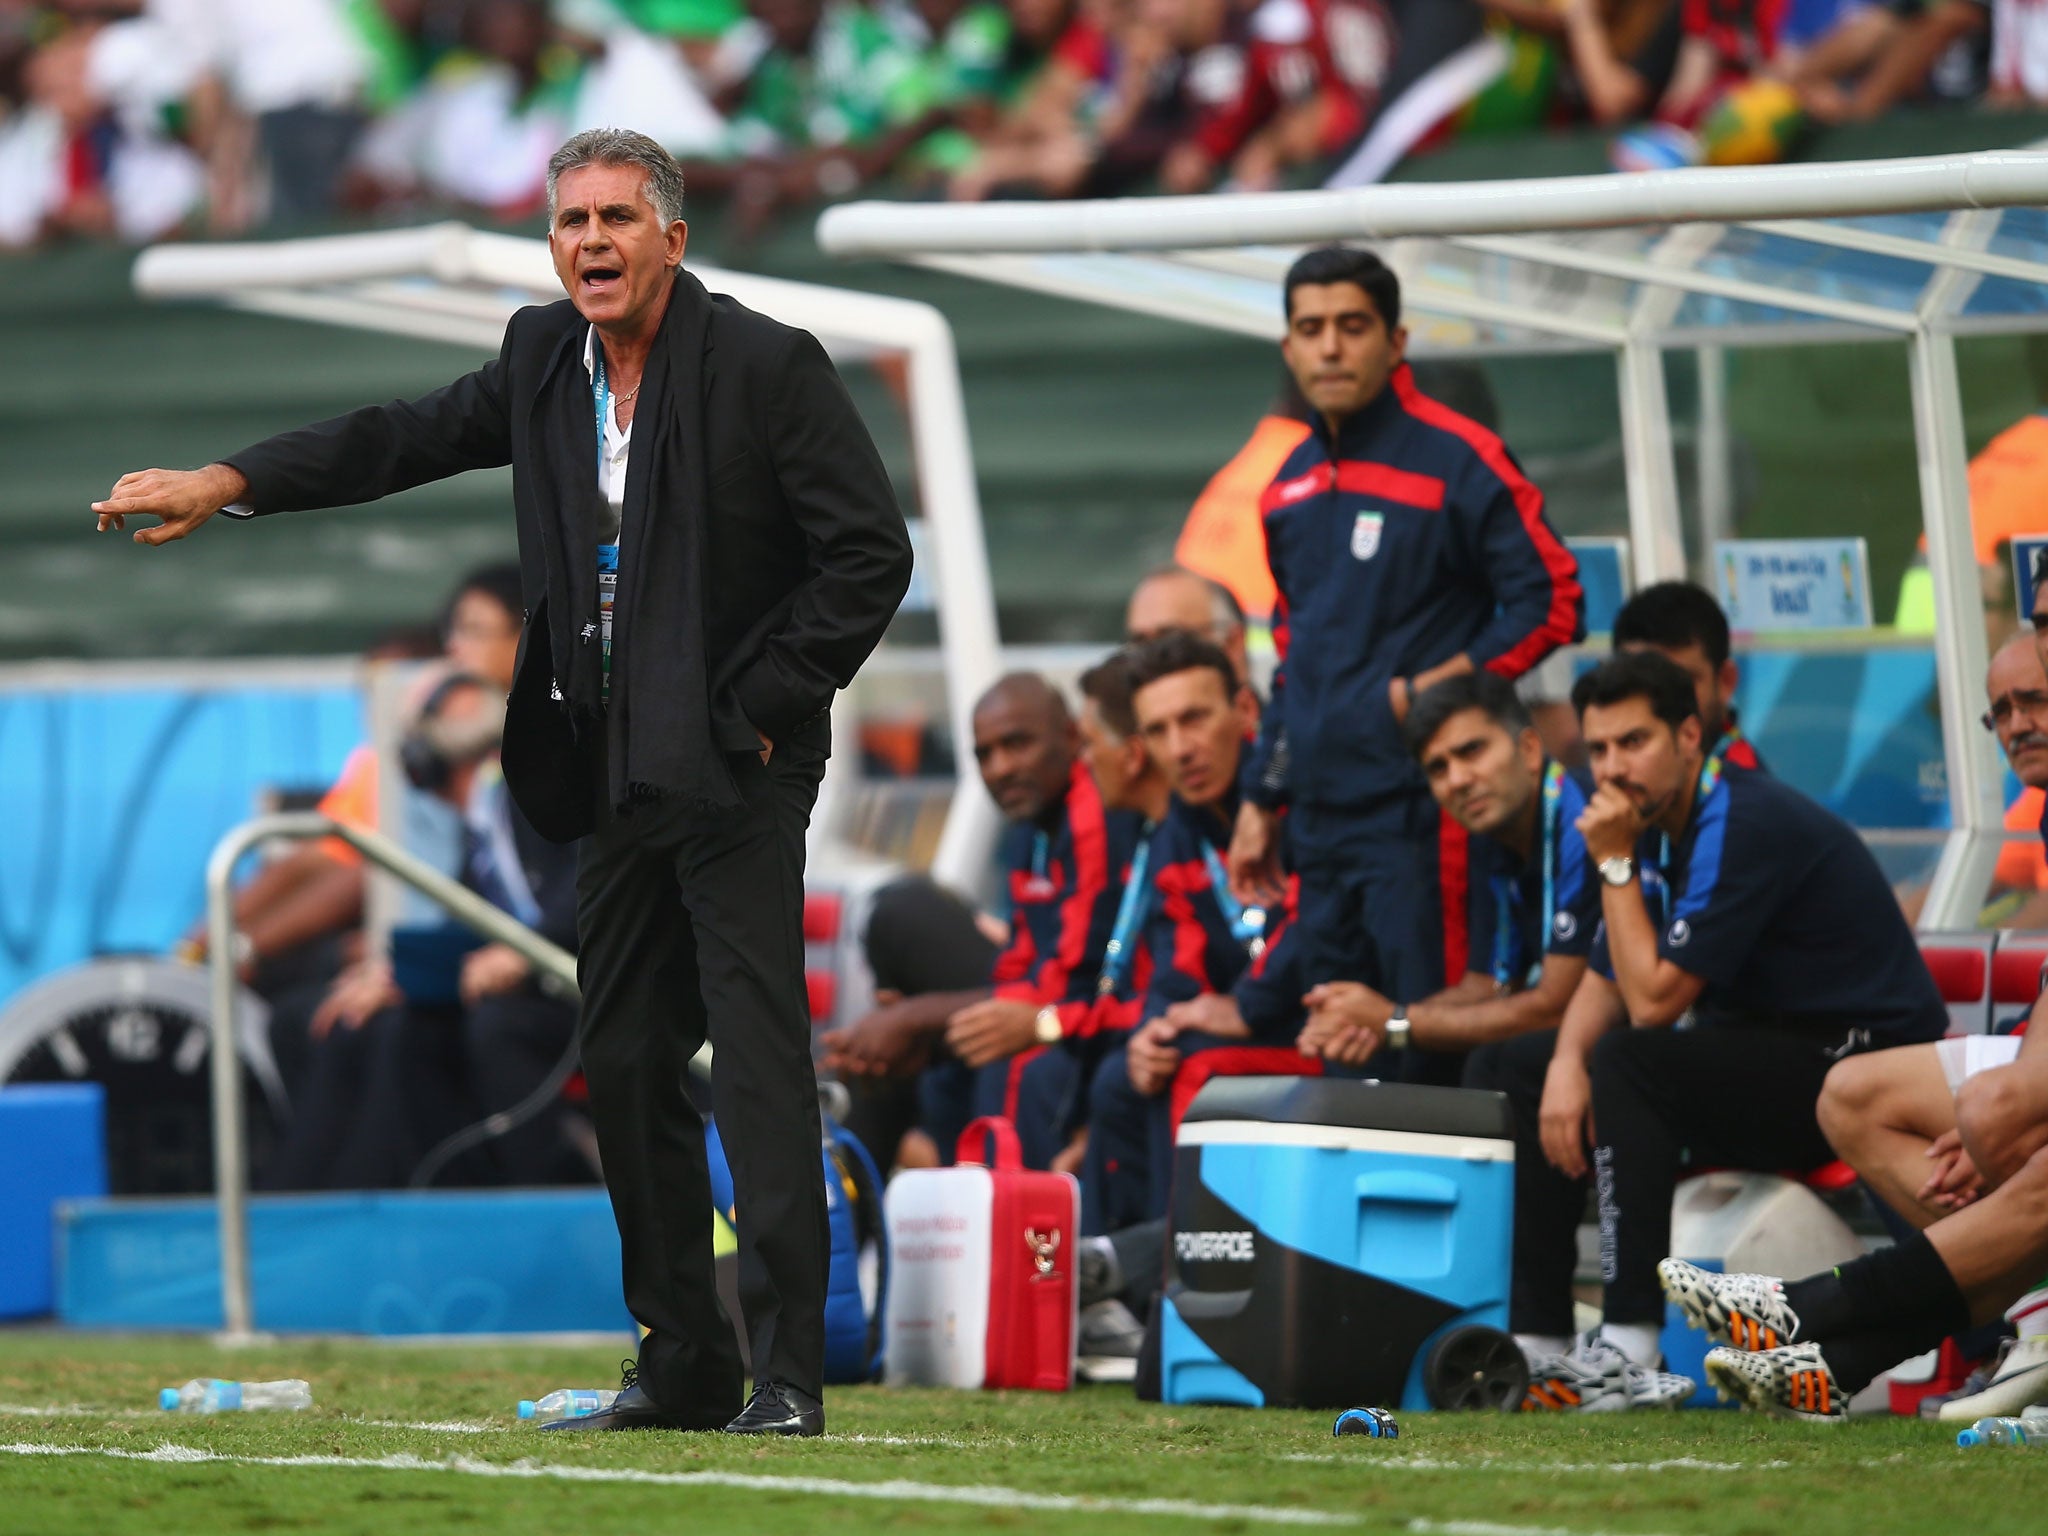 Carlos Queiroz's Iran team could cause more upsets in this tournament